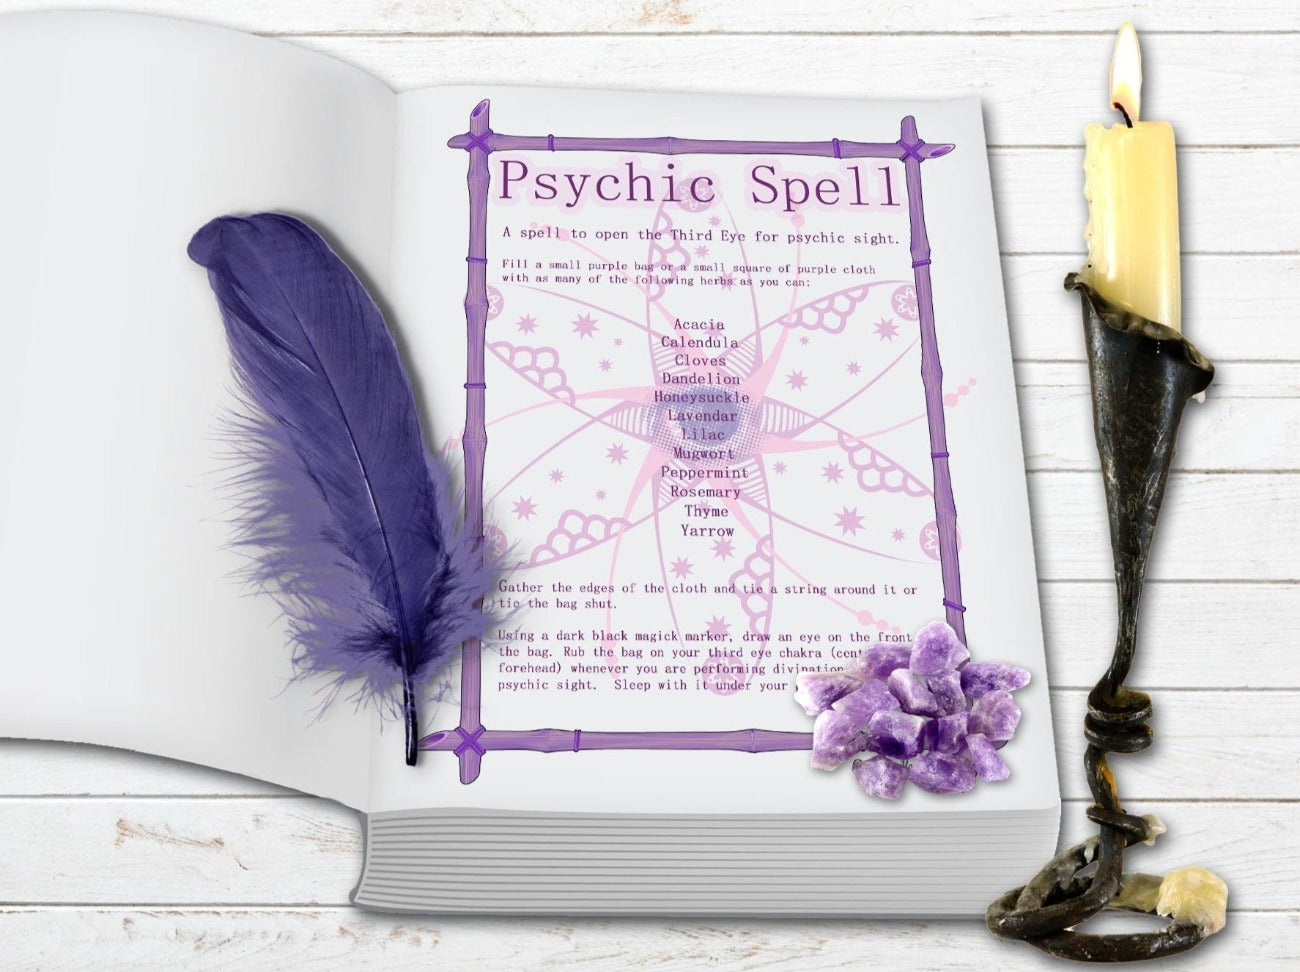 PSYCHIC SPELL, How To Open your Third Eye, Wicca Clairvoyant Magic, Telepathy Charm Bag - Morgana Magick Spell